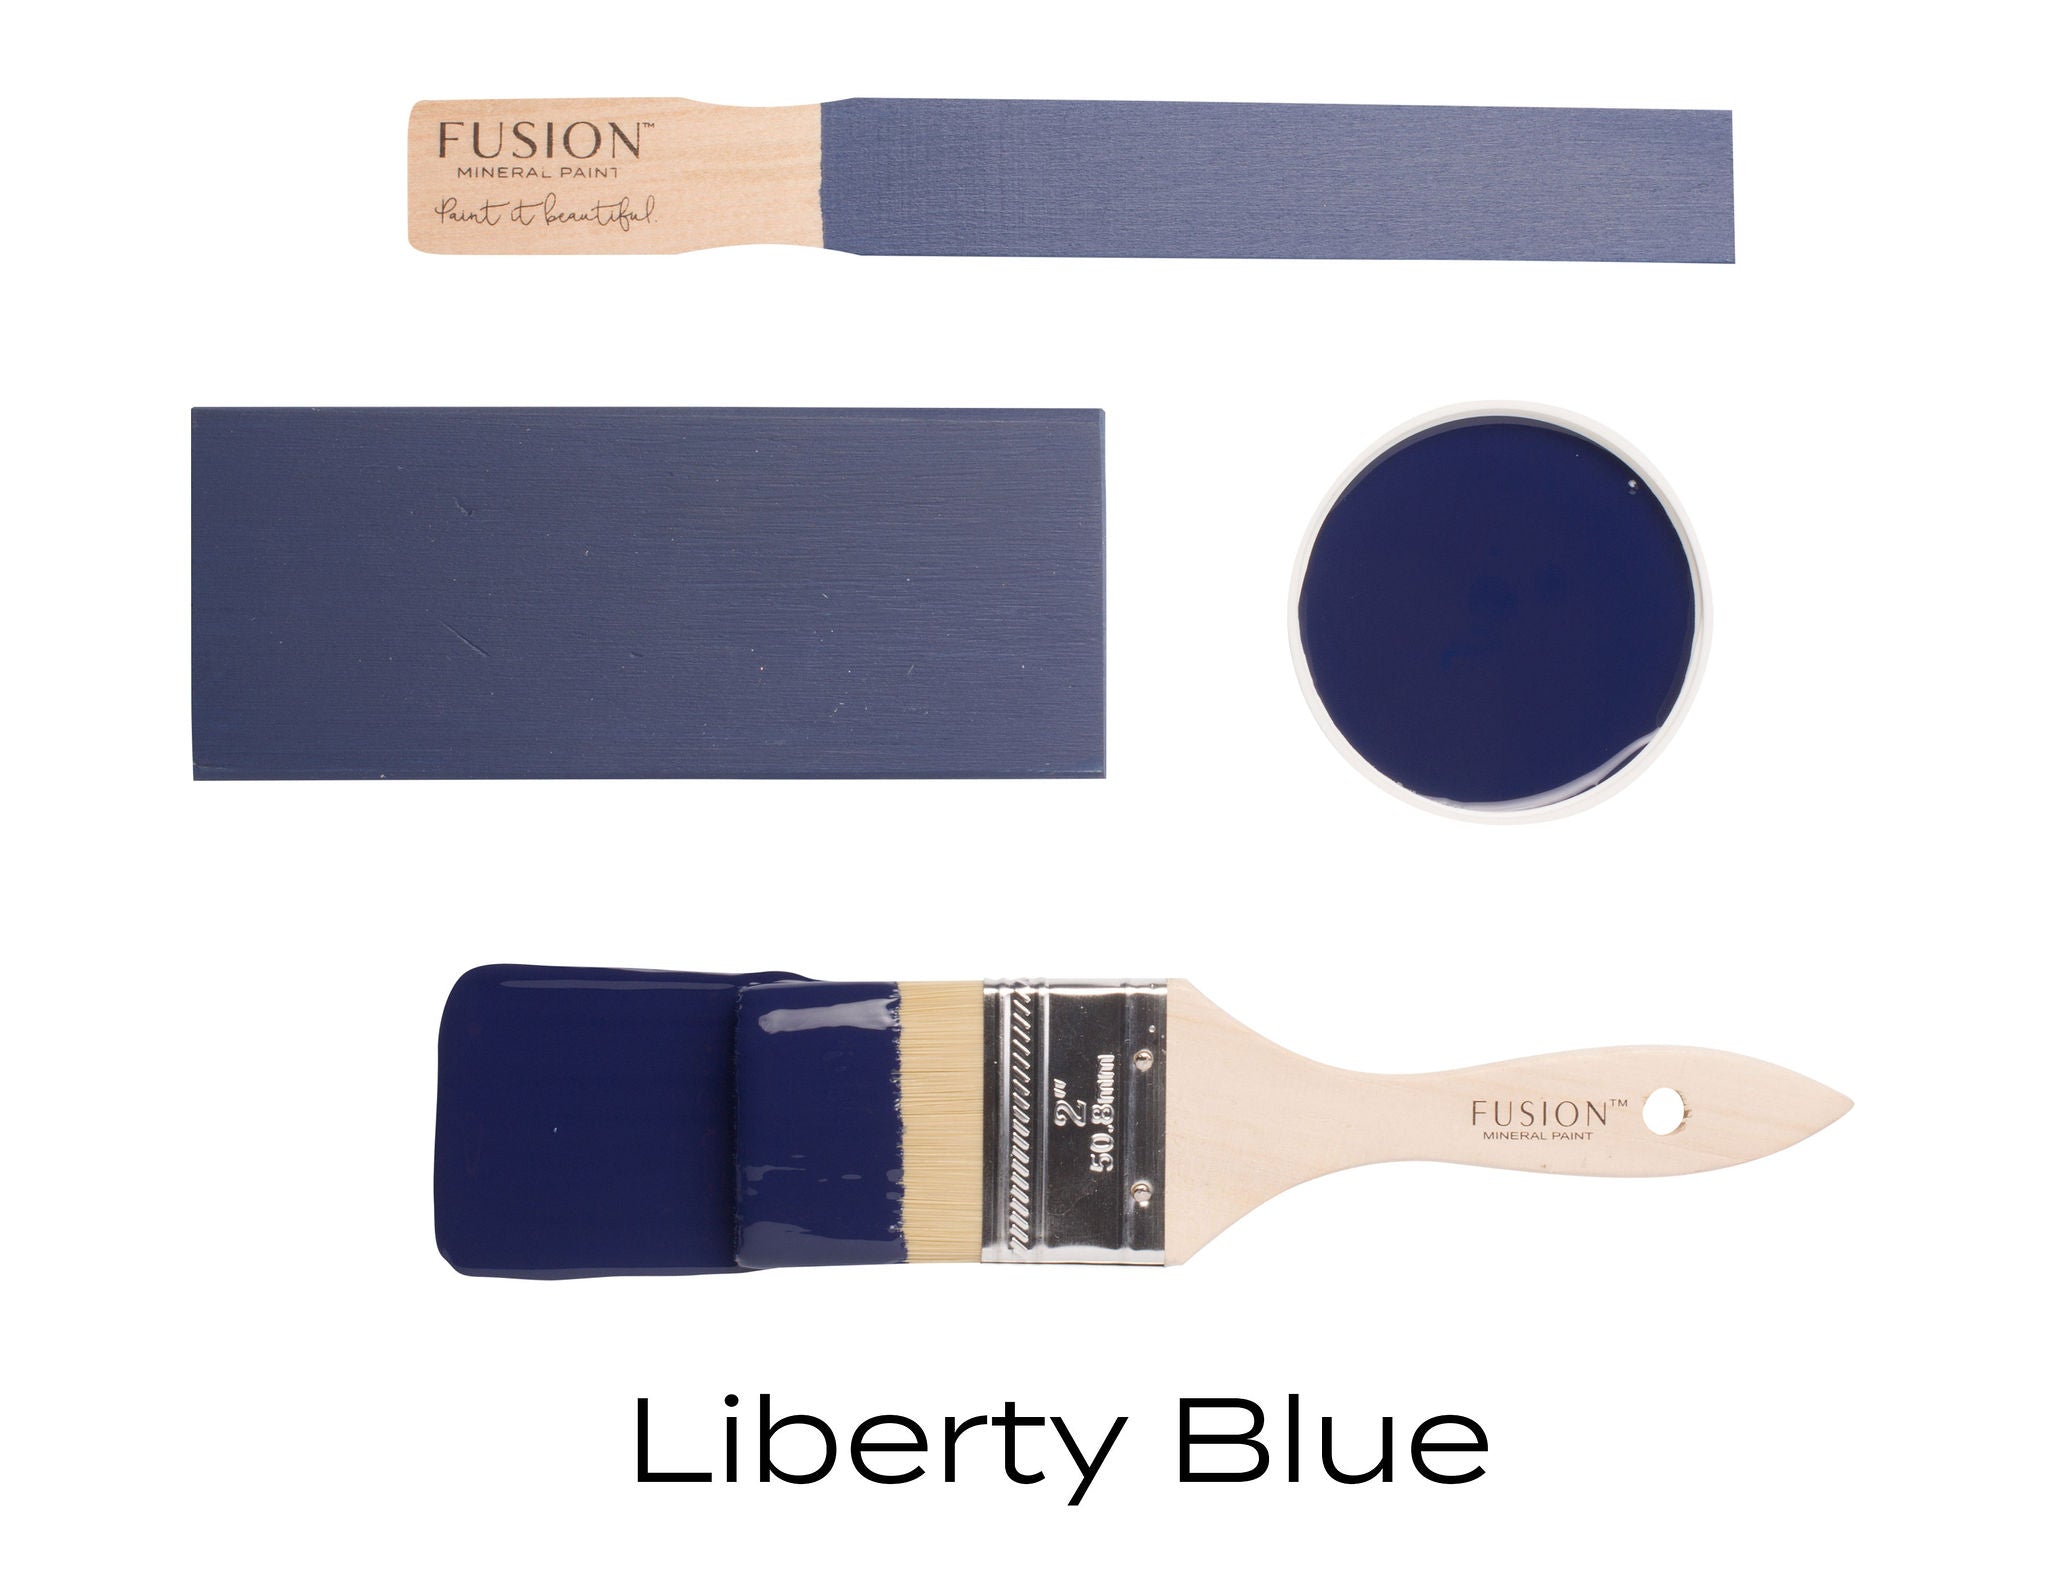 Fusion Mineral Paint - Liberty Blue Pint